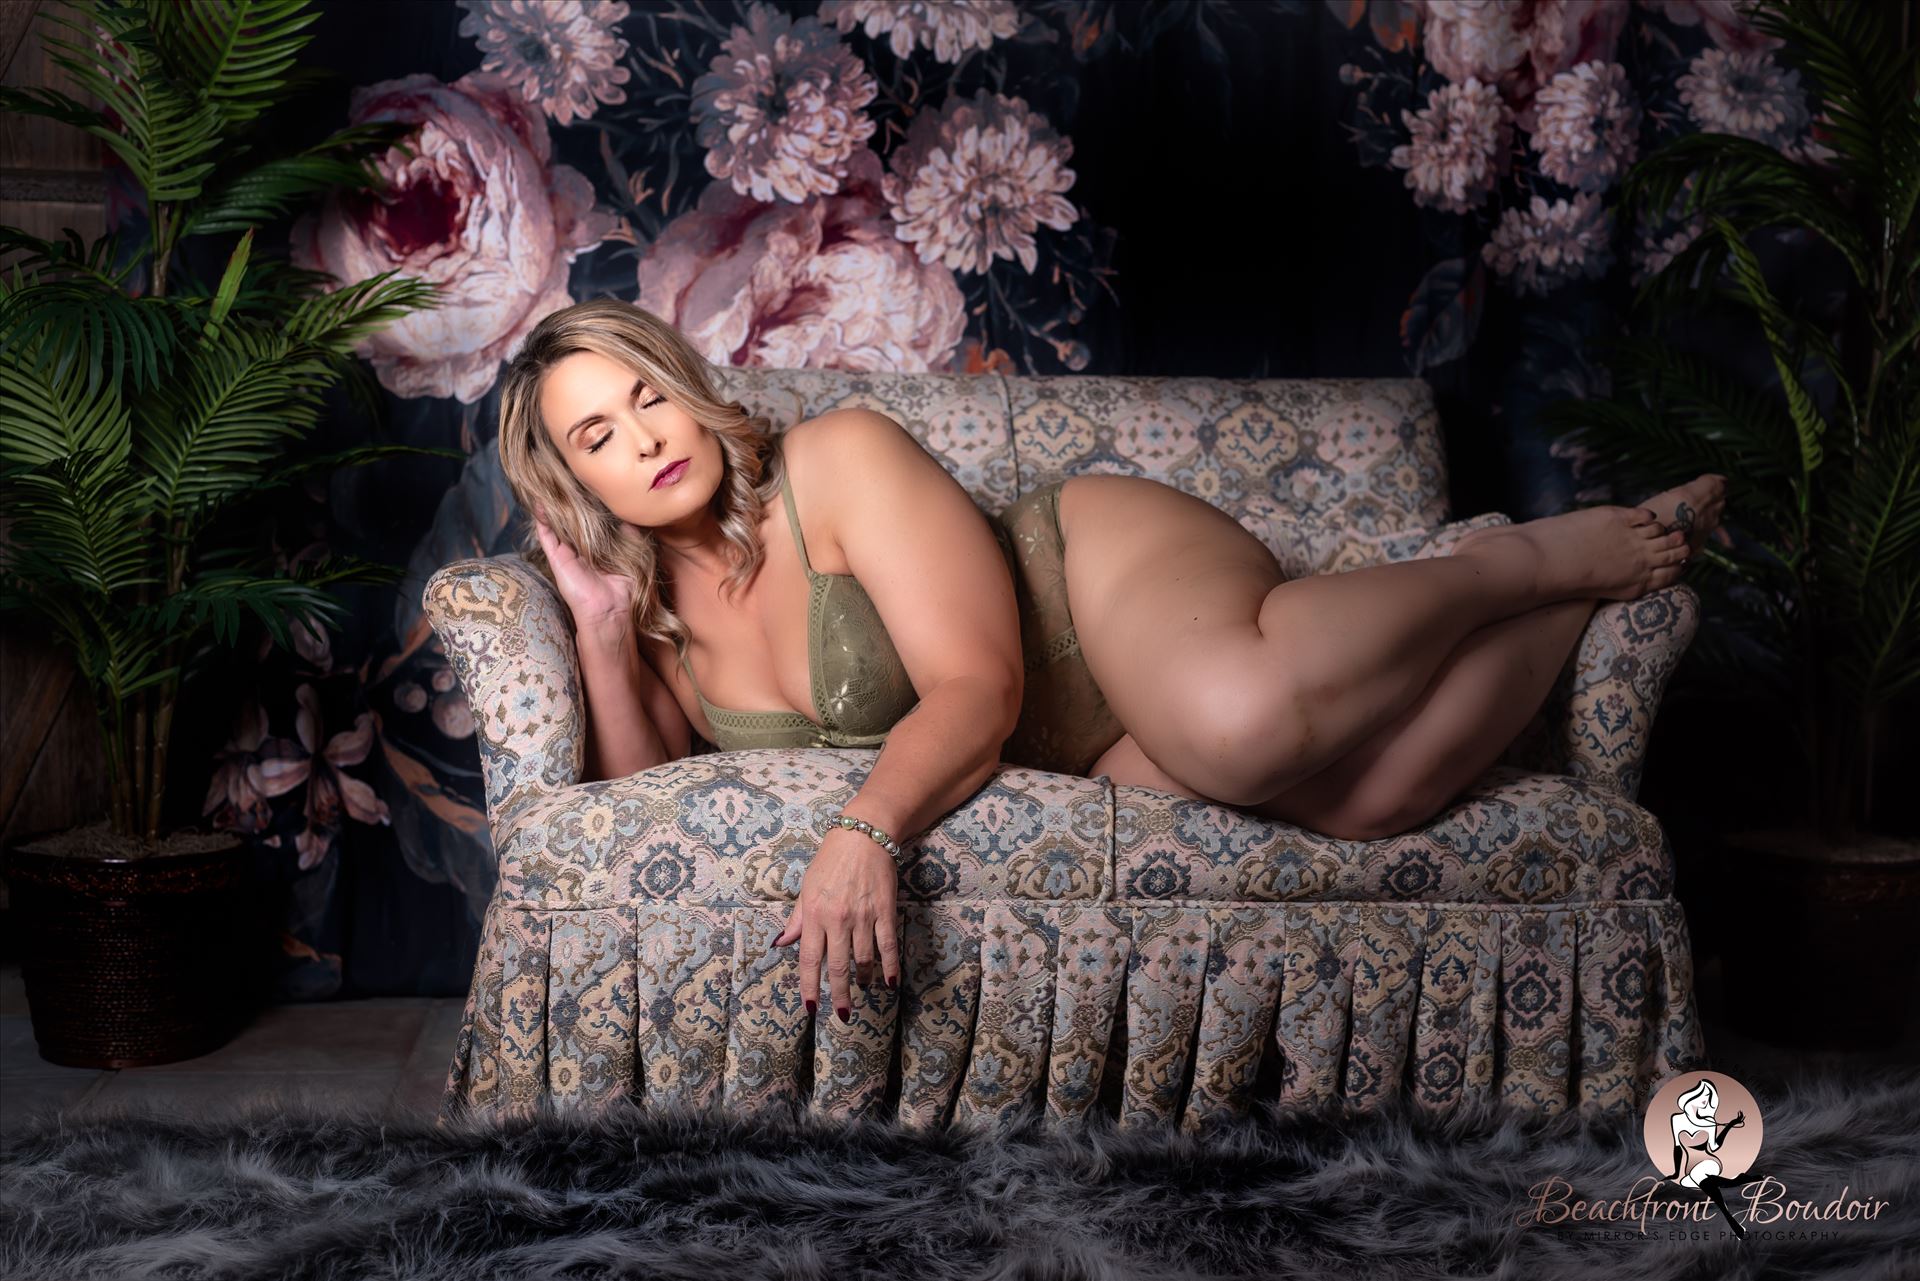 Port-2283.JPG - Beachfront Boudoir by Mirror's Edge Photography is a Boutique Luxury Boudoir Photography Studio located just blocks from the beach in Oceano, California. My mission is to show as many women as possible how beautiful they truly are! by Sarah Williams